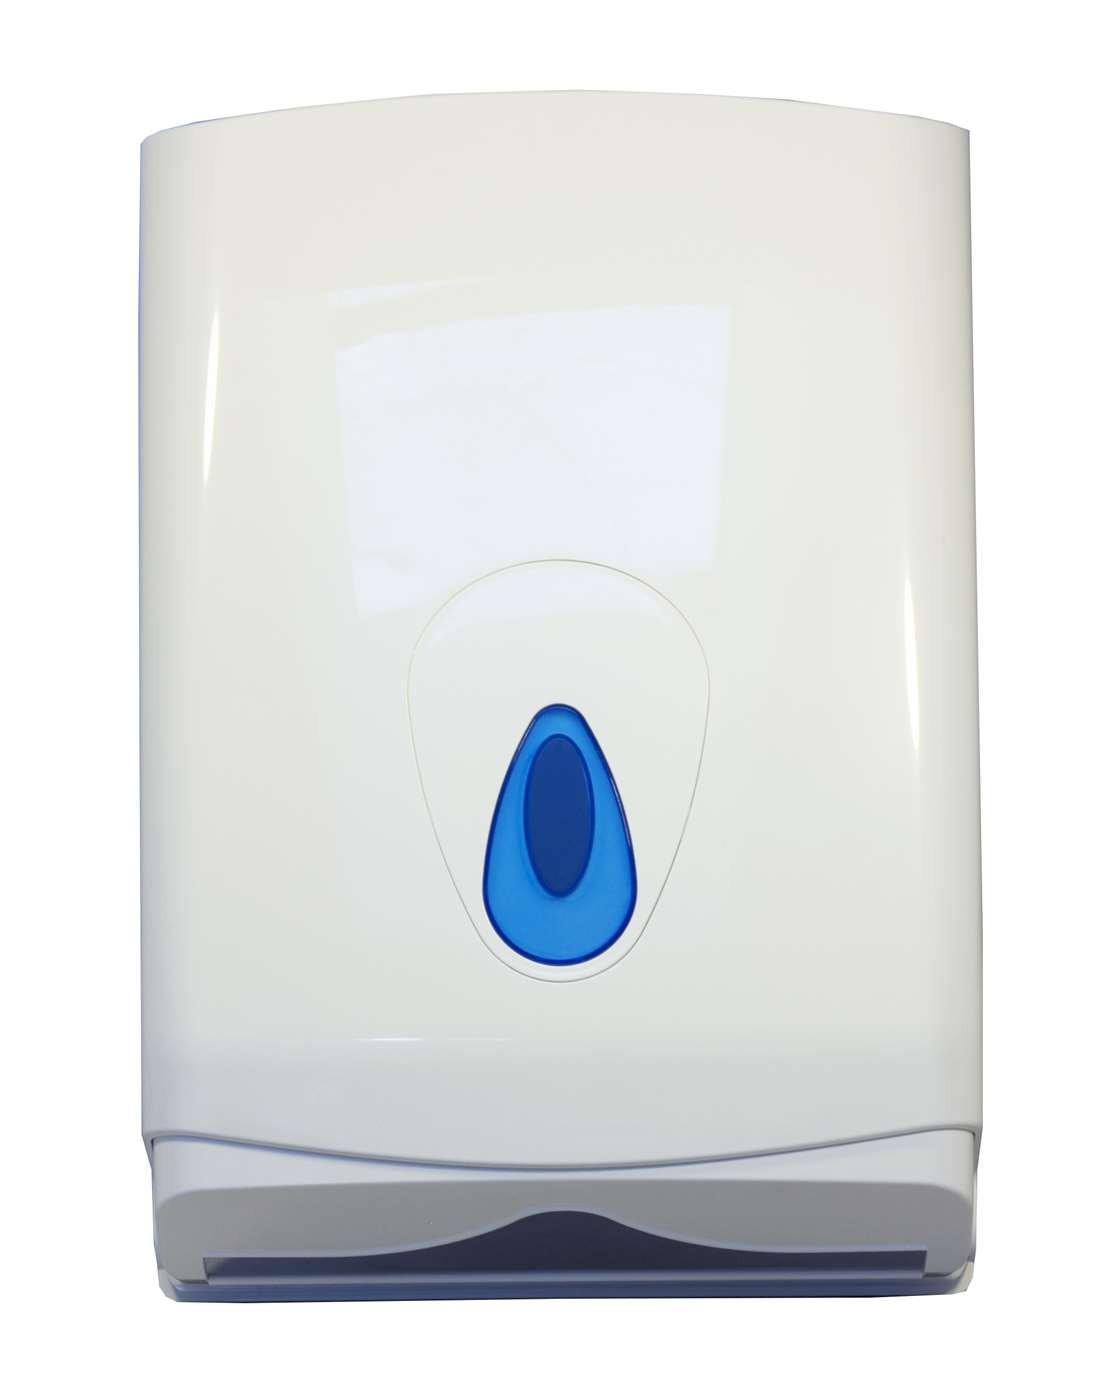 PRO+Large+Universal+Paper+Hand+Towel+Dispenser.White+ABS+plastic%2C+lockable+dispenser+suitable+for+C-fold+and+V-fold+Paper+Towels+4THL-WB%2FF%2FD9